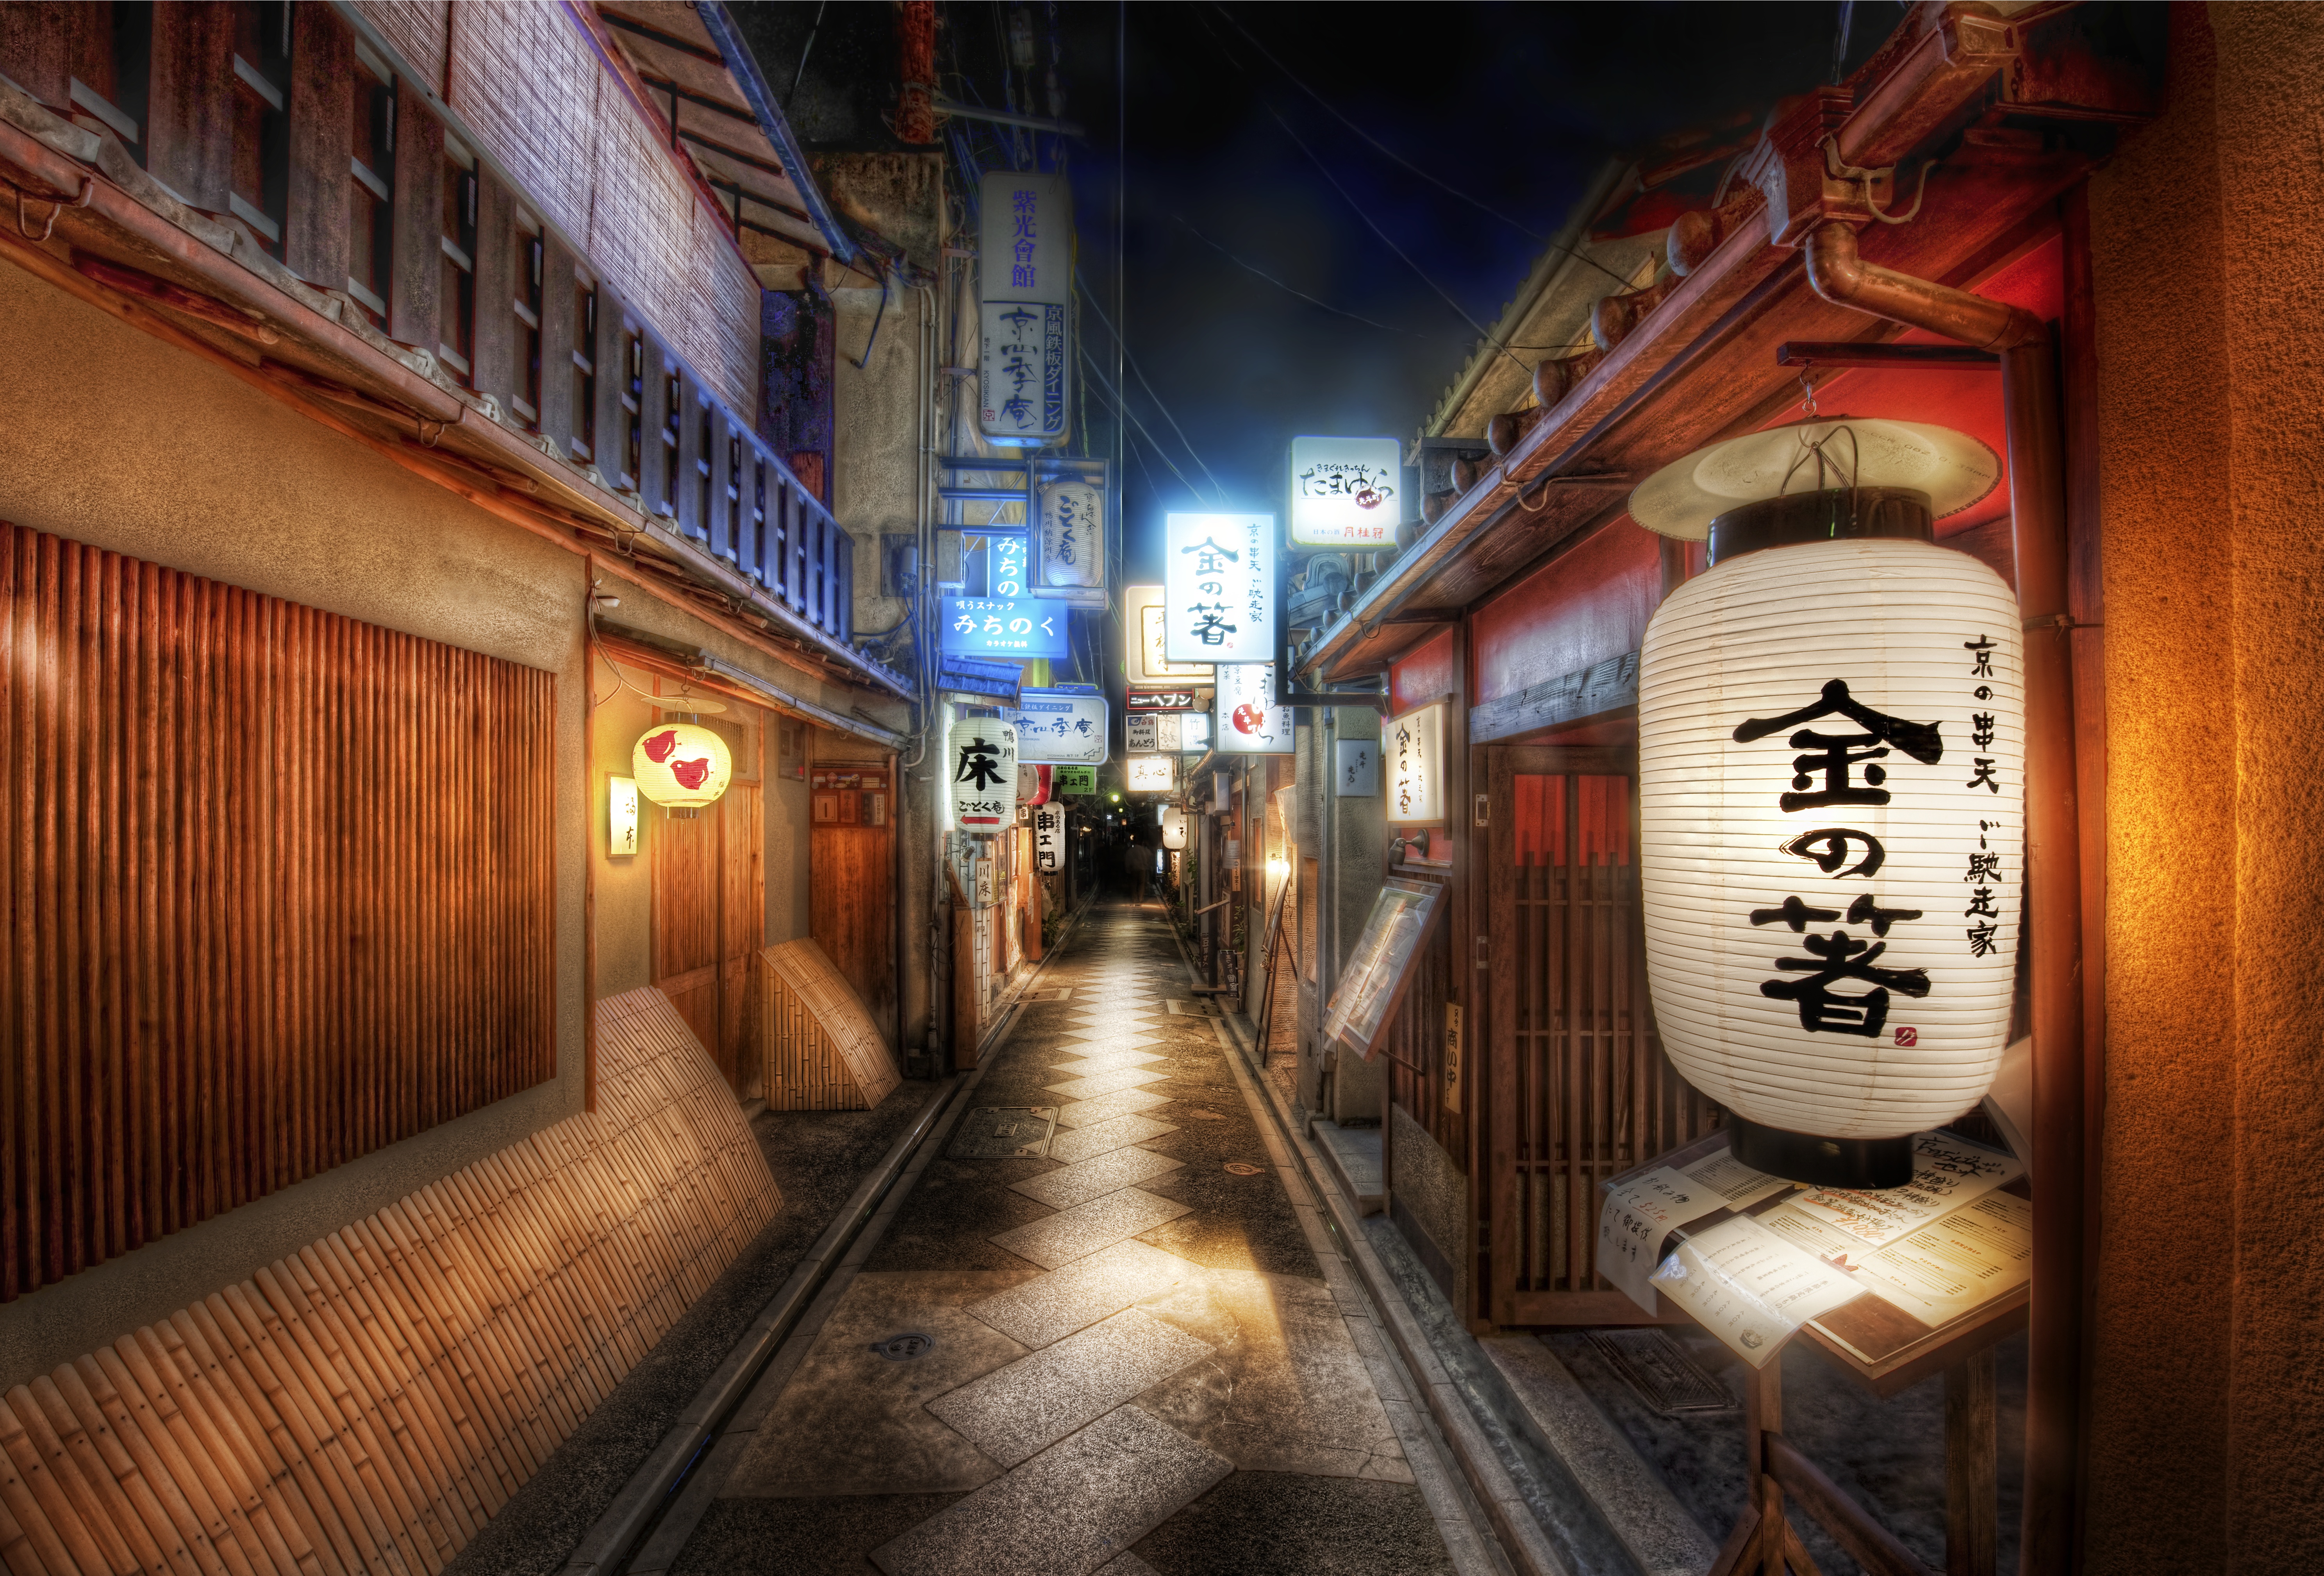 Streets of Kyoto by Trey Ratcliff